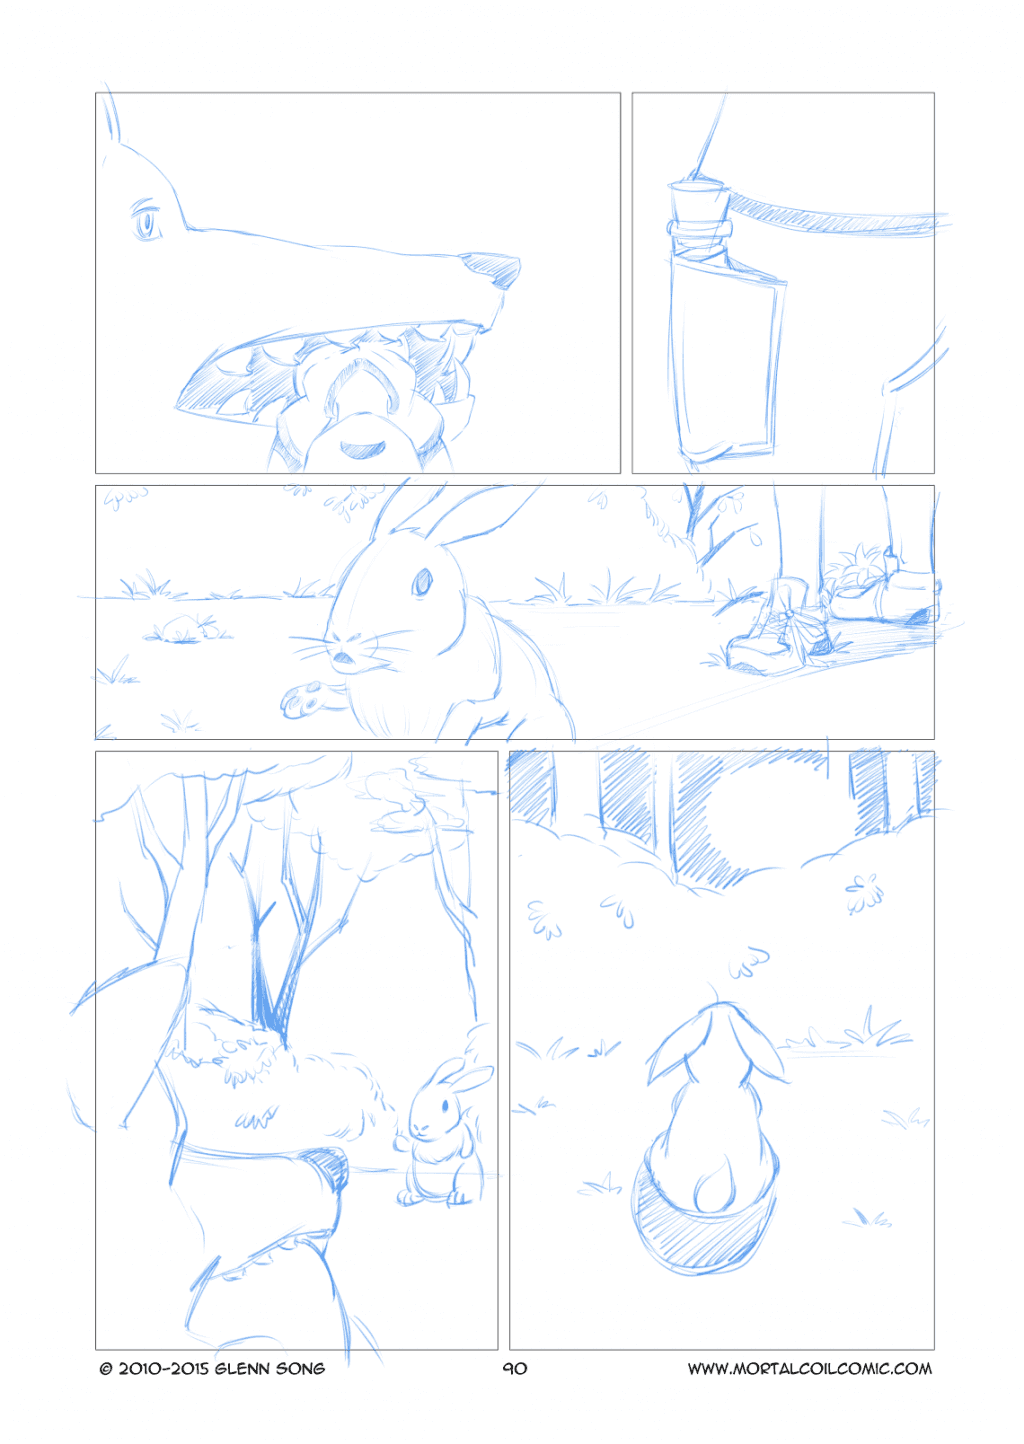 A Voice in the Woods - 7 Pencils